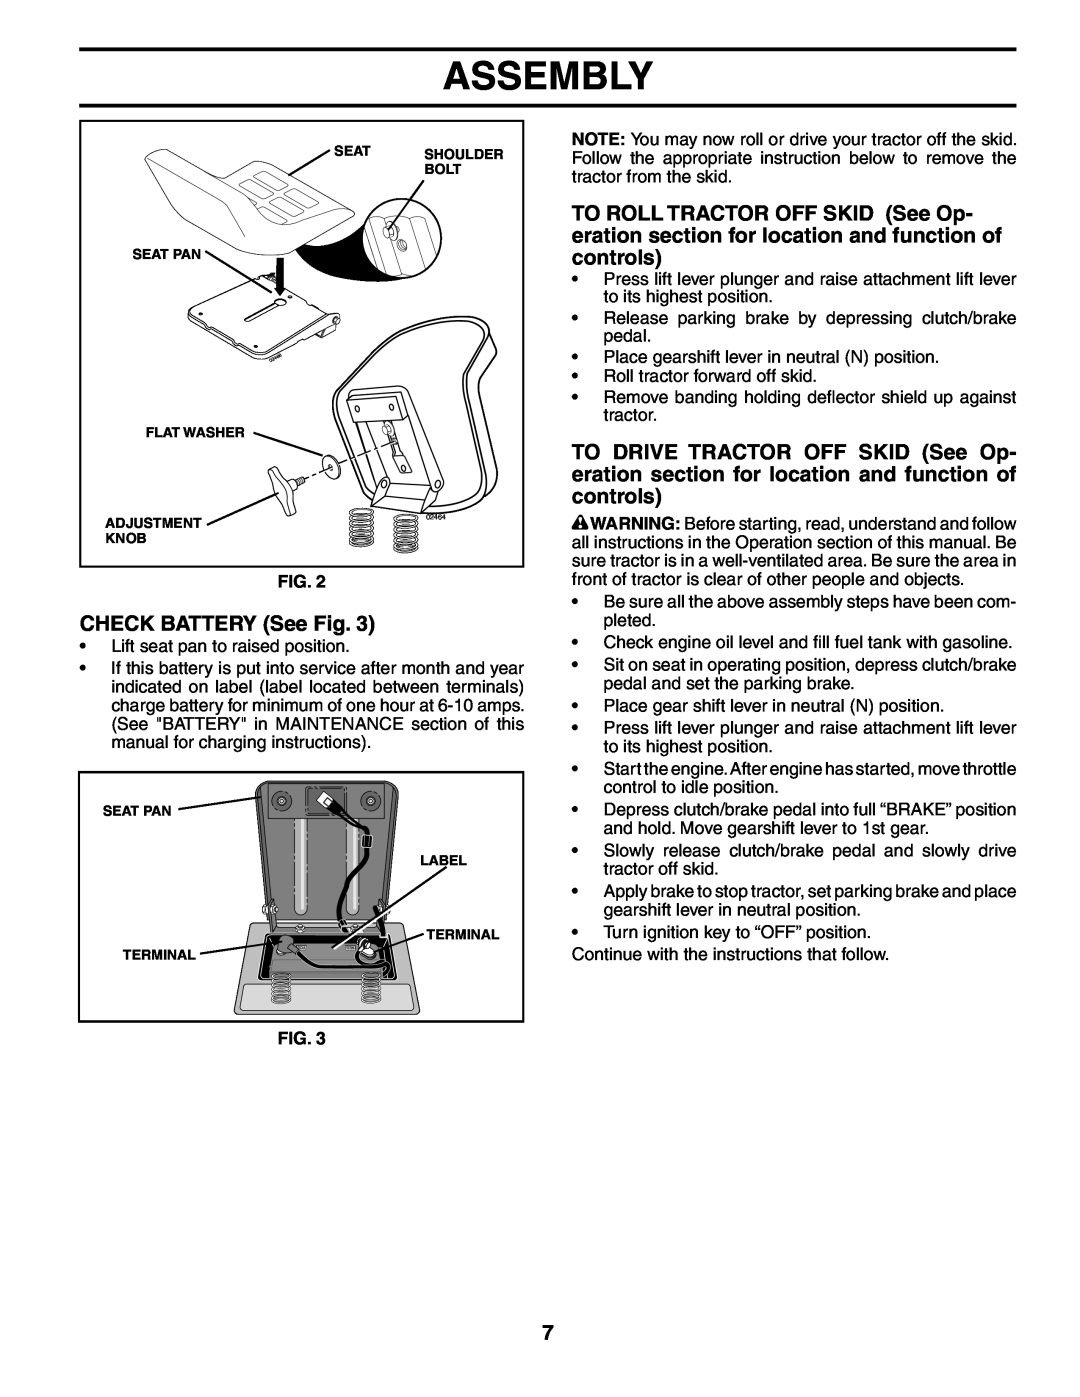 Poulan 960120003 manual CHECK BATTERY See Fig, Assembly 